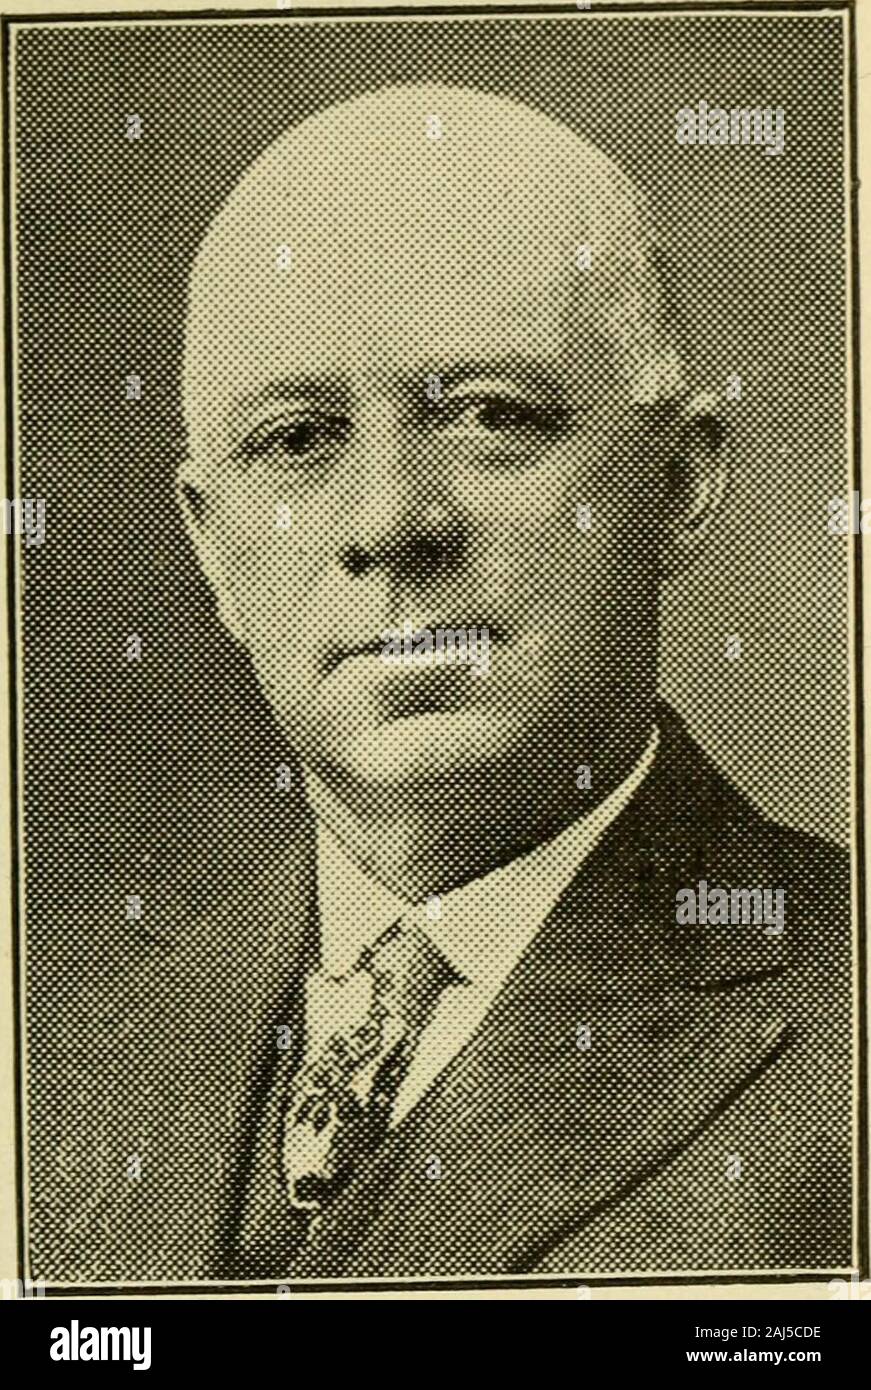 Public officials of Massachusetts . KELLEY, JAMES J., Boston, 14th Suf-folk House District, Democrat Born: Roxbury, Sept. 7. 1874. Educated Comins School. Business: Chauffeur. Public office: Boston Common Council1904, 1905, 1906; Mass. House 1919, 1920 202. KEMP, WALTER H., Colrain, 1st Frank-lin House District, Republican. Born: Colrain. Educated: Powers Institute. Business: Farmer. Organizations: Grange, President ofColrain Fruit Growers Inc. Public office: Chairman of Selectmen 14years, School Committee 3 years. Chair-man Board of Assessors 4 years. INIass.House 1920. 203 Stock Photo